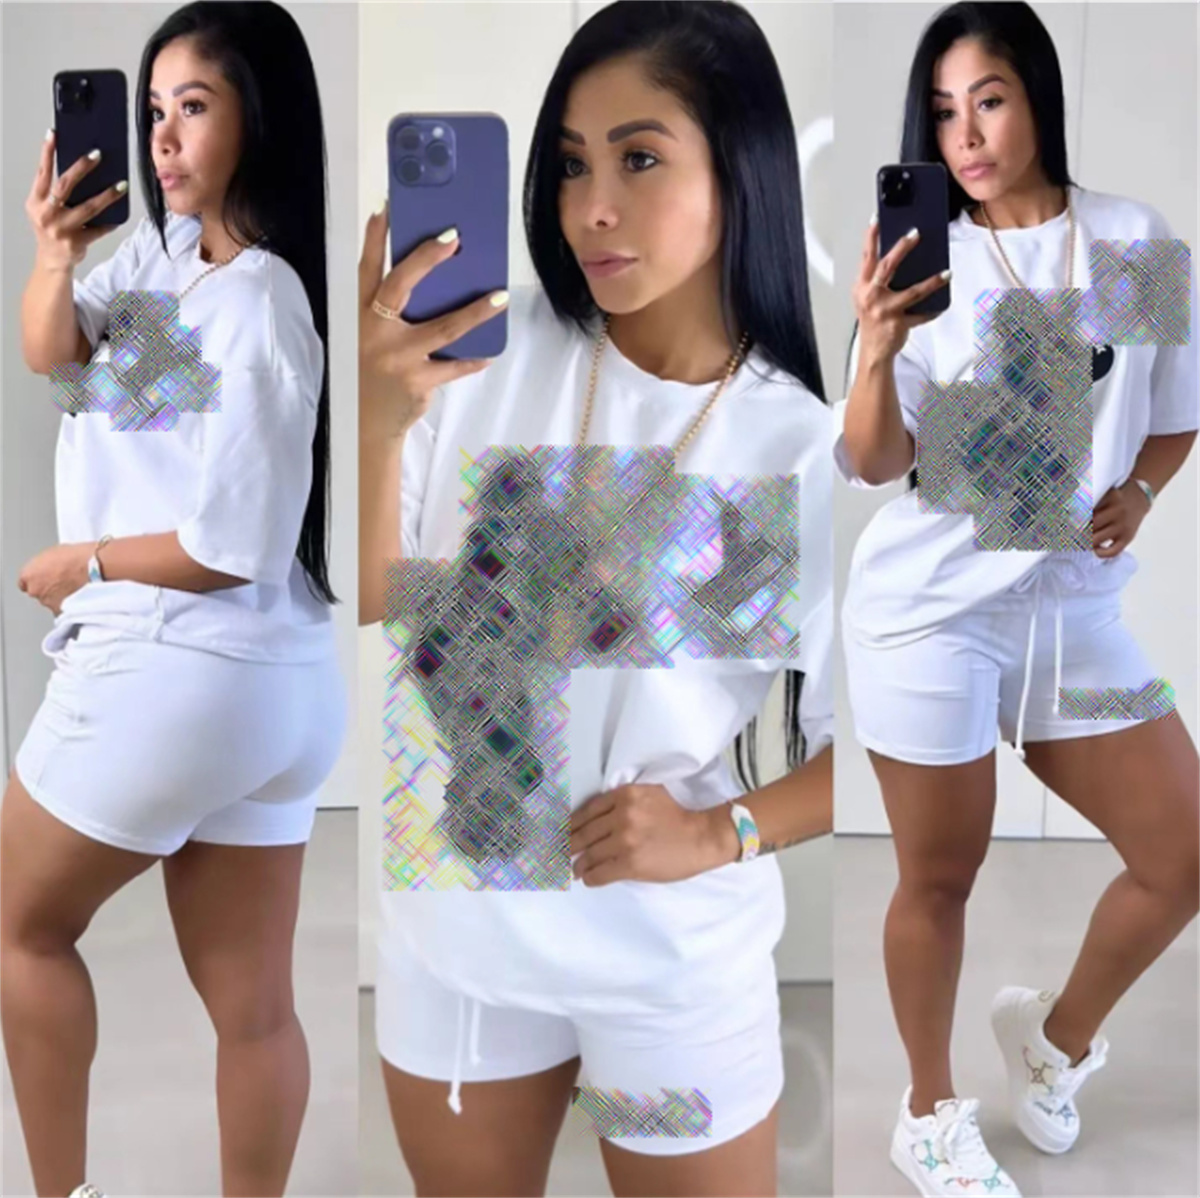 Women Set Designer Tracksuits Outfits Plus Size T Shirt Pants Jogger Sport Suit Fashion Letter Print O-neck tops And Shorts Jogging Suits Sporting Clothing